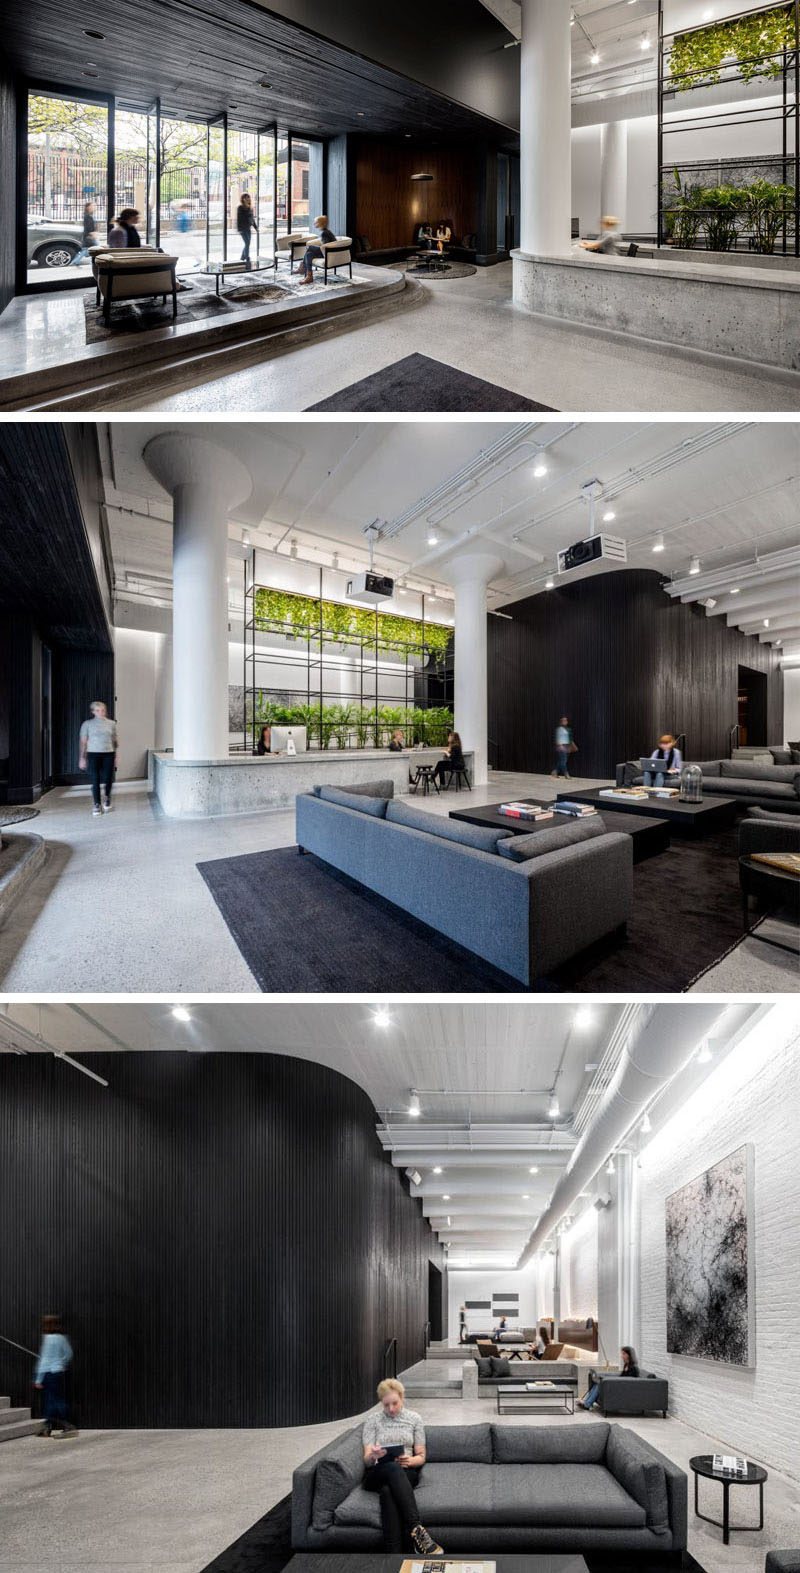 This office lobby is home to a concrete reception desk with plant feature, and large double-height ceilings. There's plenty of seating and the lobby can also double as an event space.